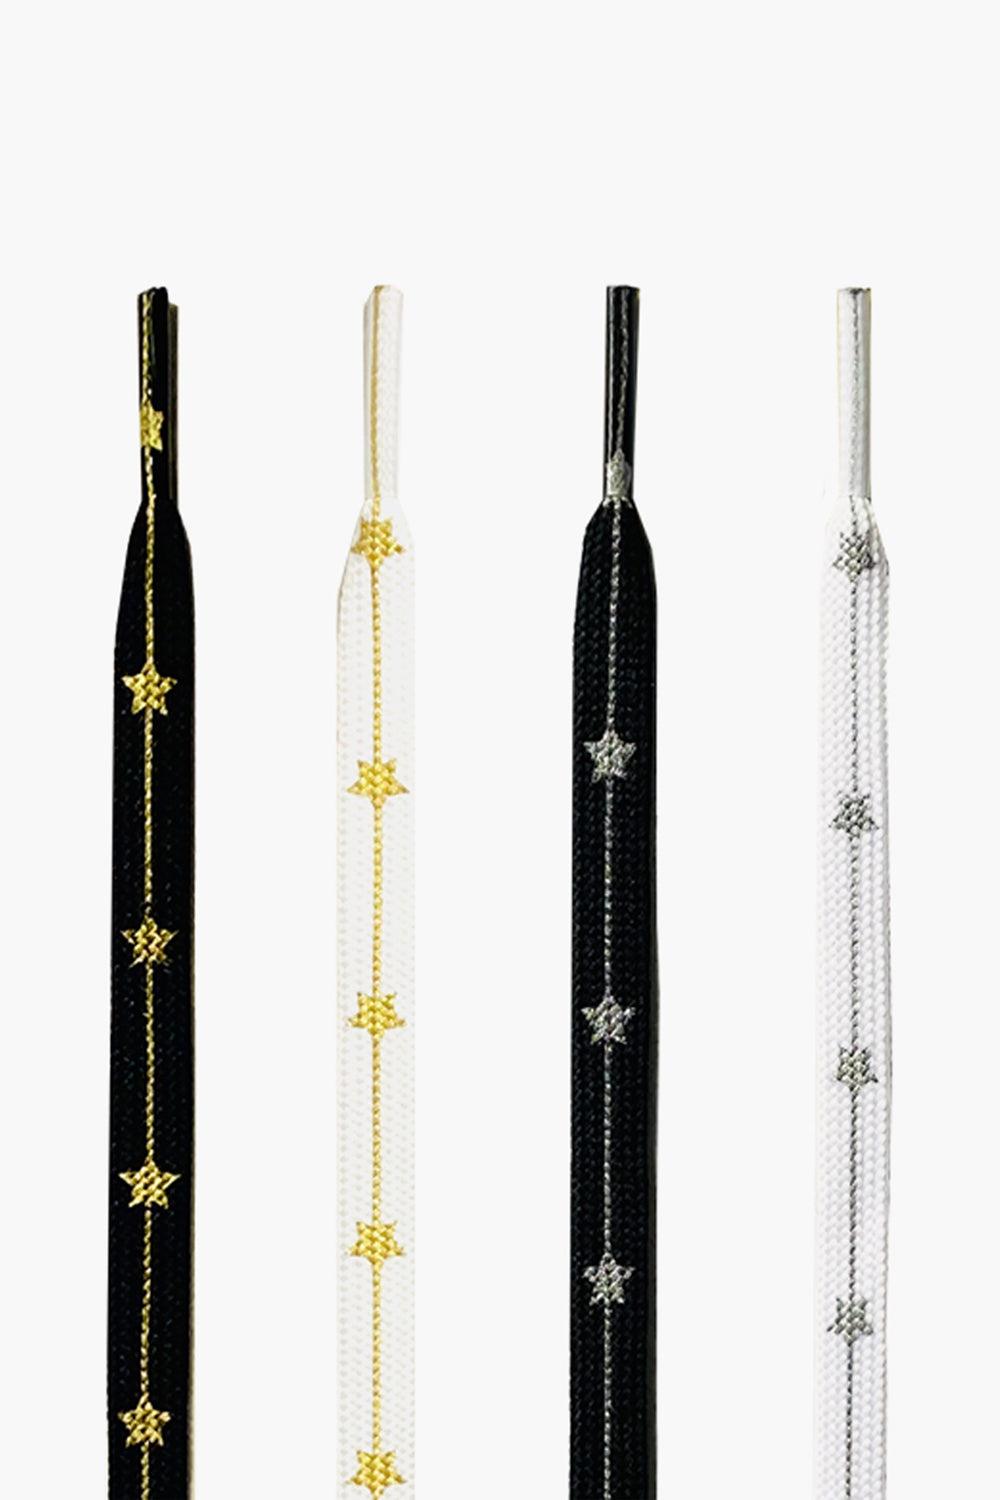 Silver and Gold Stars Shoelaces - Aesthetic Clothes Shop